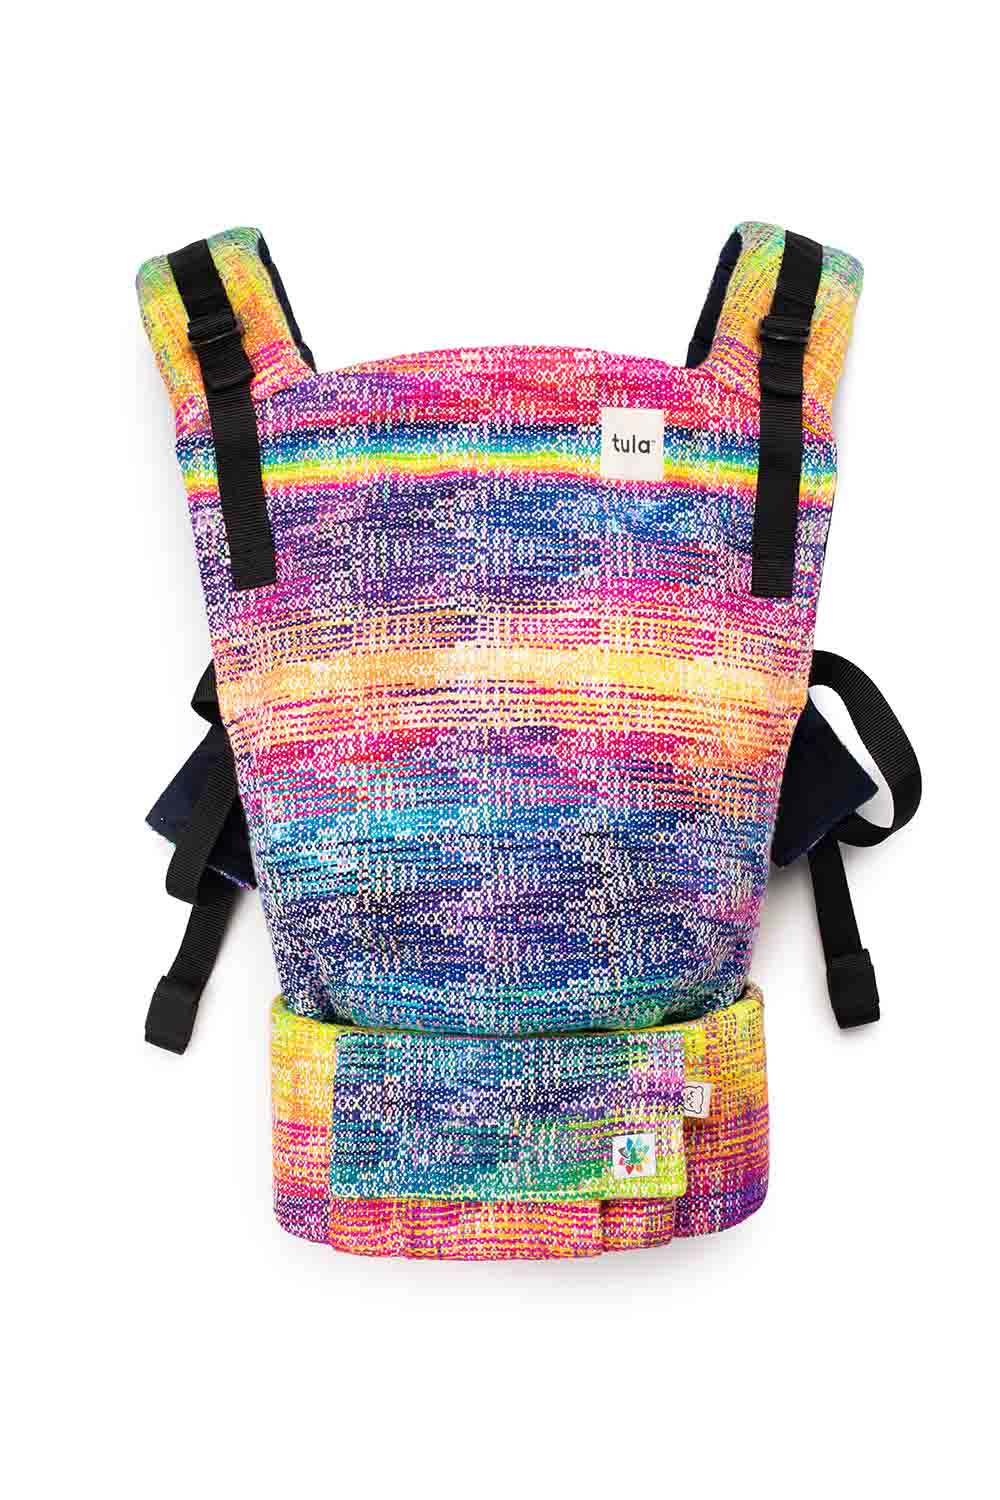 The Official Frog - Signature Handwoven Free-to-Grow Baby Carrier